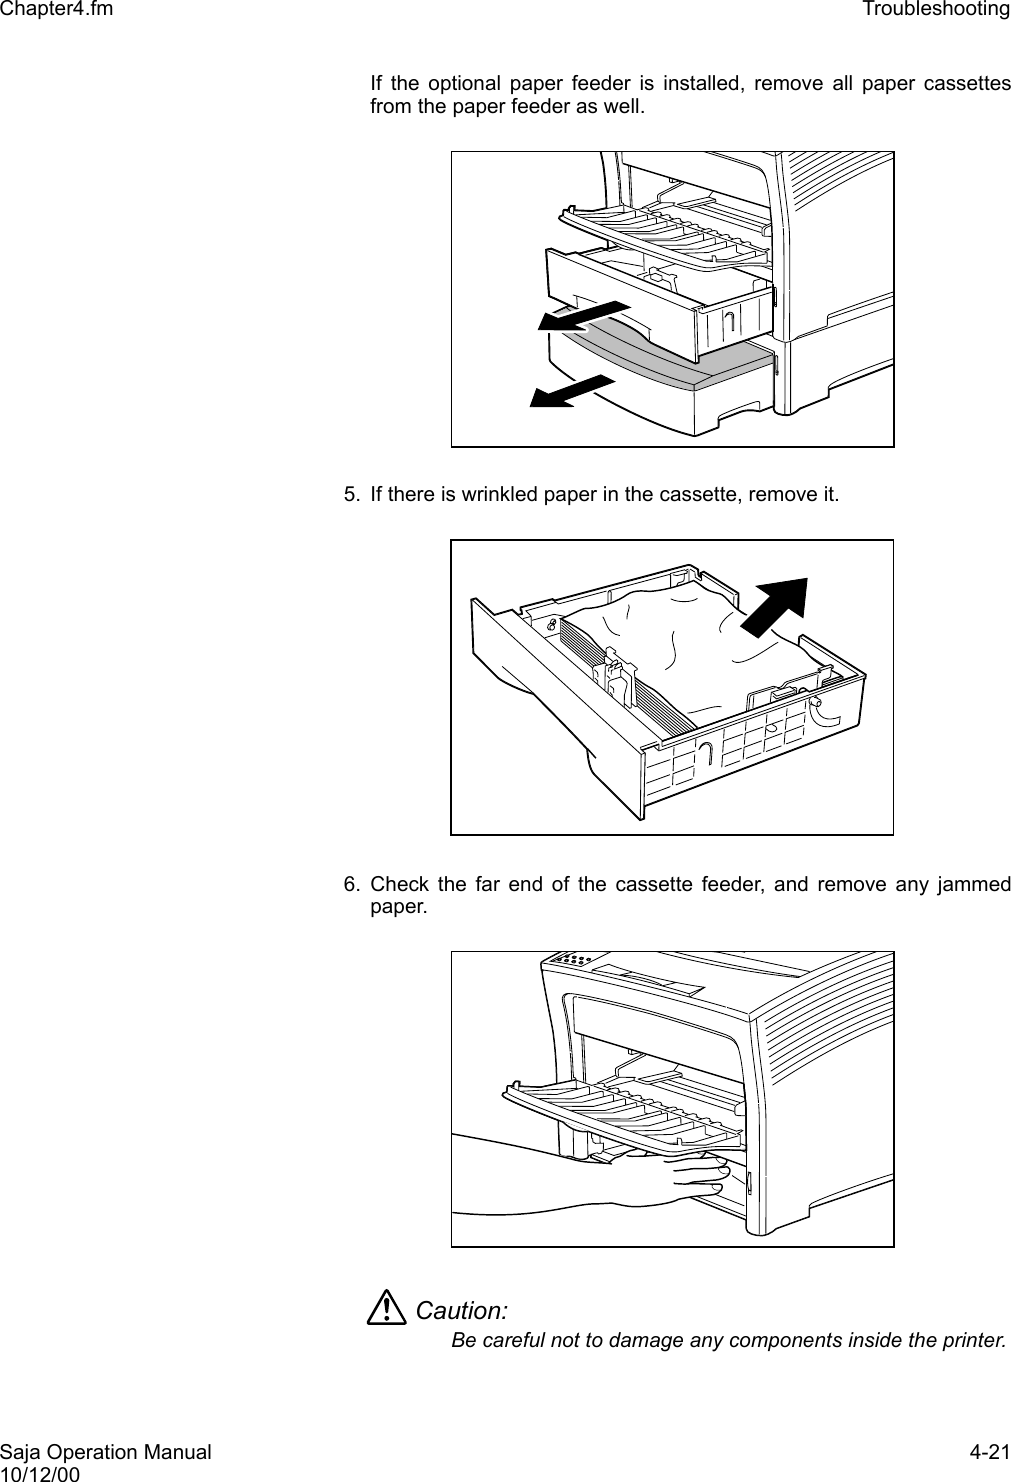 Saja Operation Manual 4-2110/12/00Chapter4.fm Troubleshooting If the optional paper feeder is installed, remove all paper cassettesfrom the paper feeder as well.5. If there is wrinkled paper in the cassette, remove it. 6. Check the far end of the cassette feeder, and remove any jammedpaper. Caution: Be careful not to damage any components inside the printer.